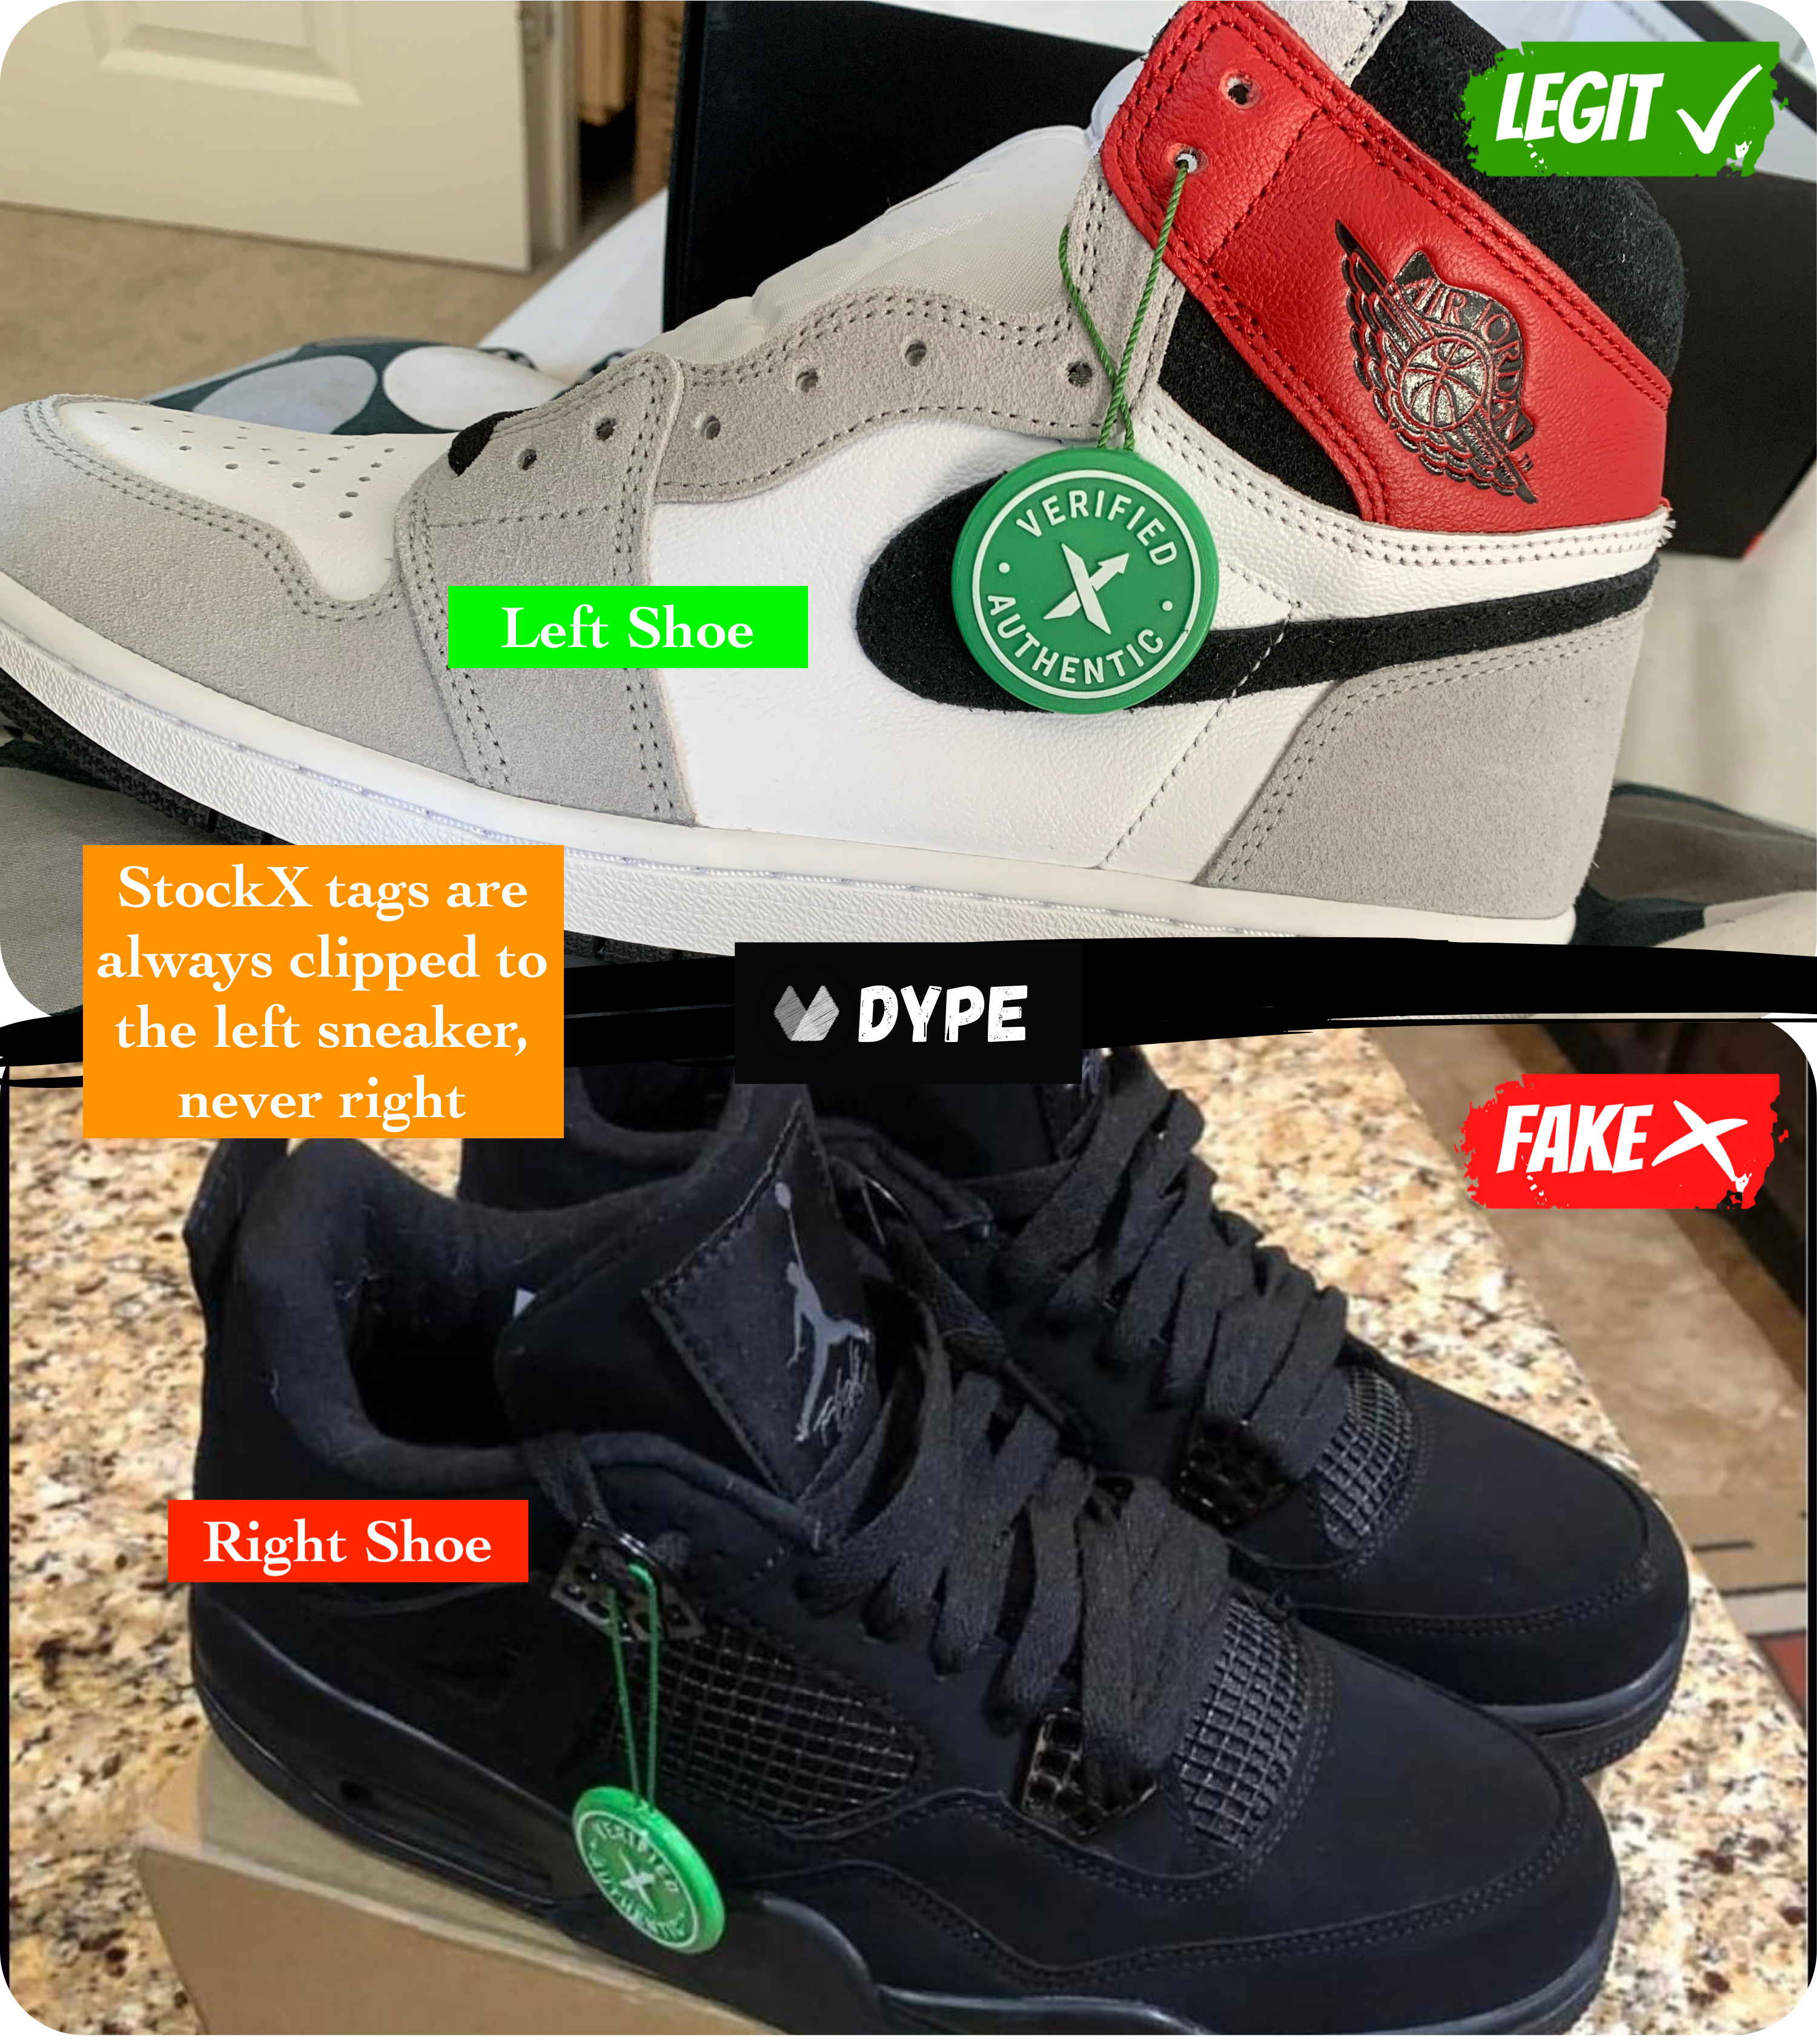 Can You Wear StockX Tags On Your Sneakers 🤔